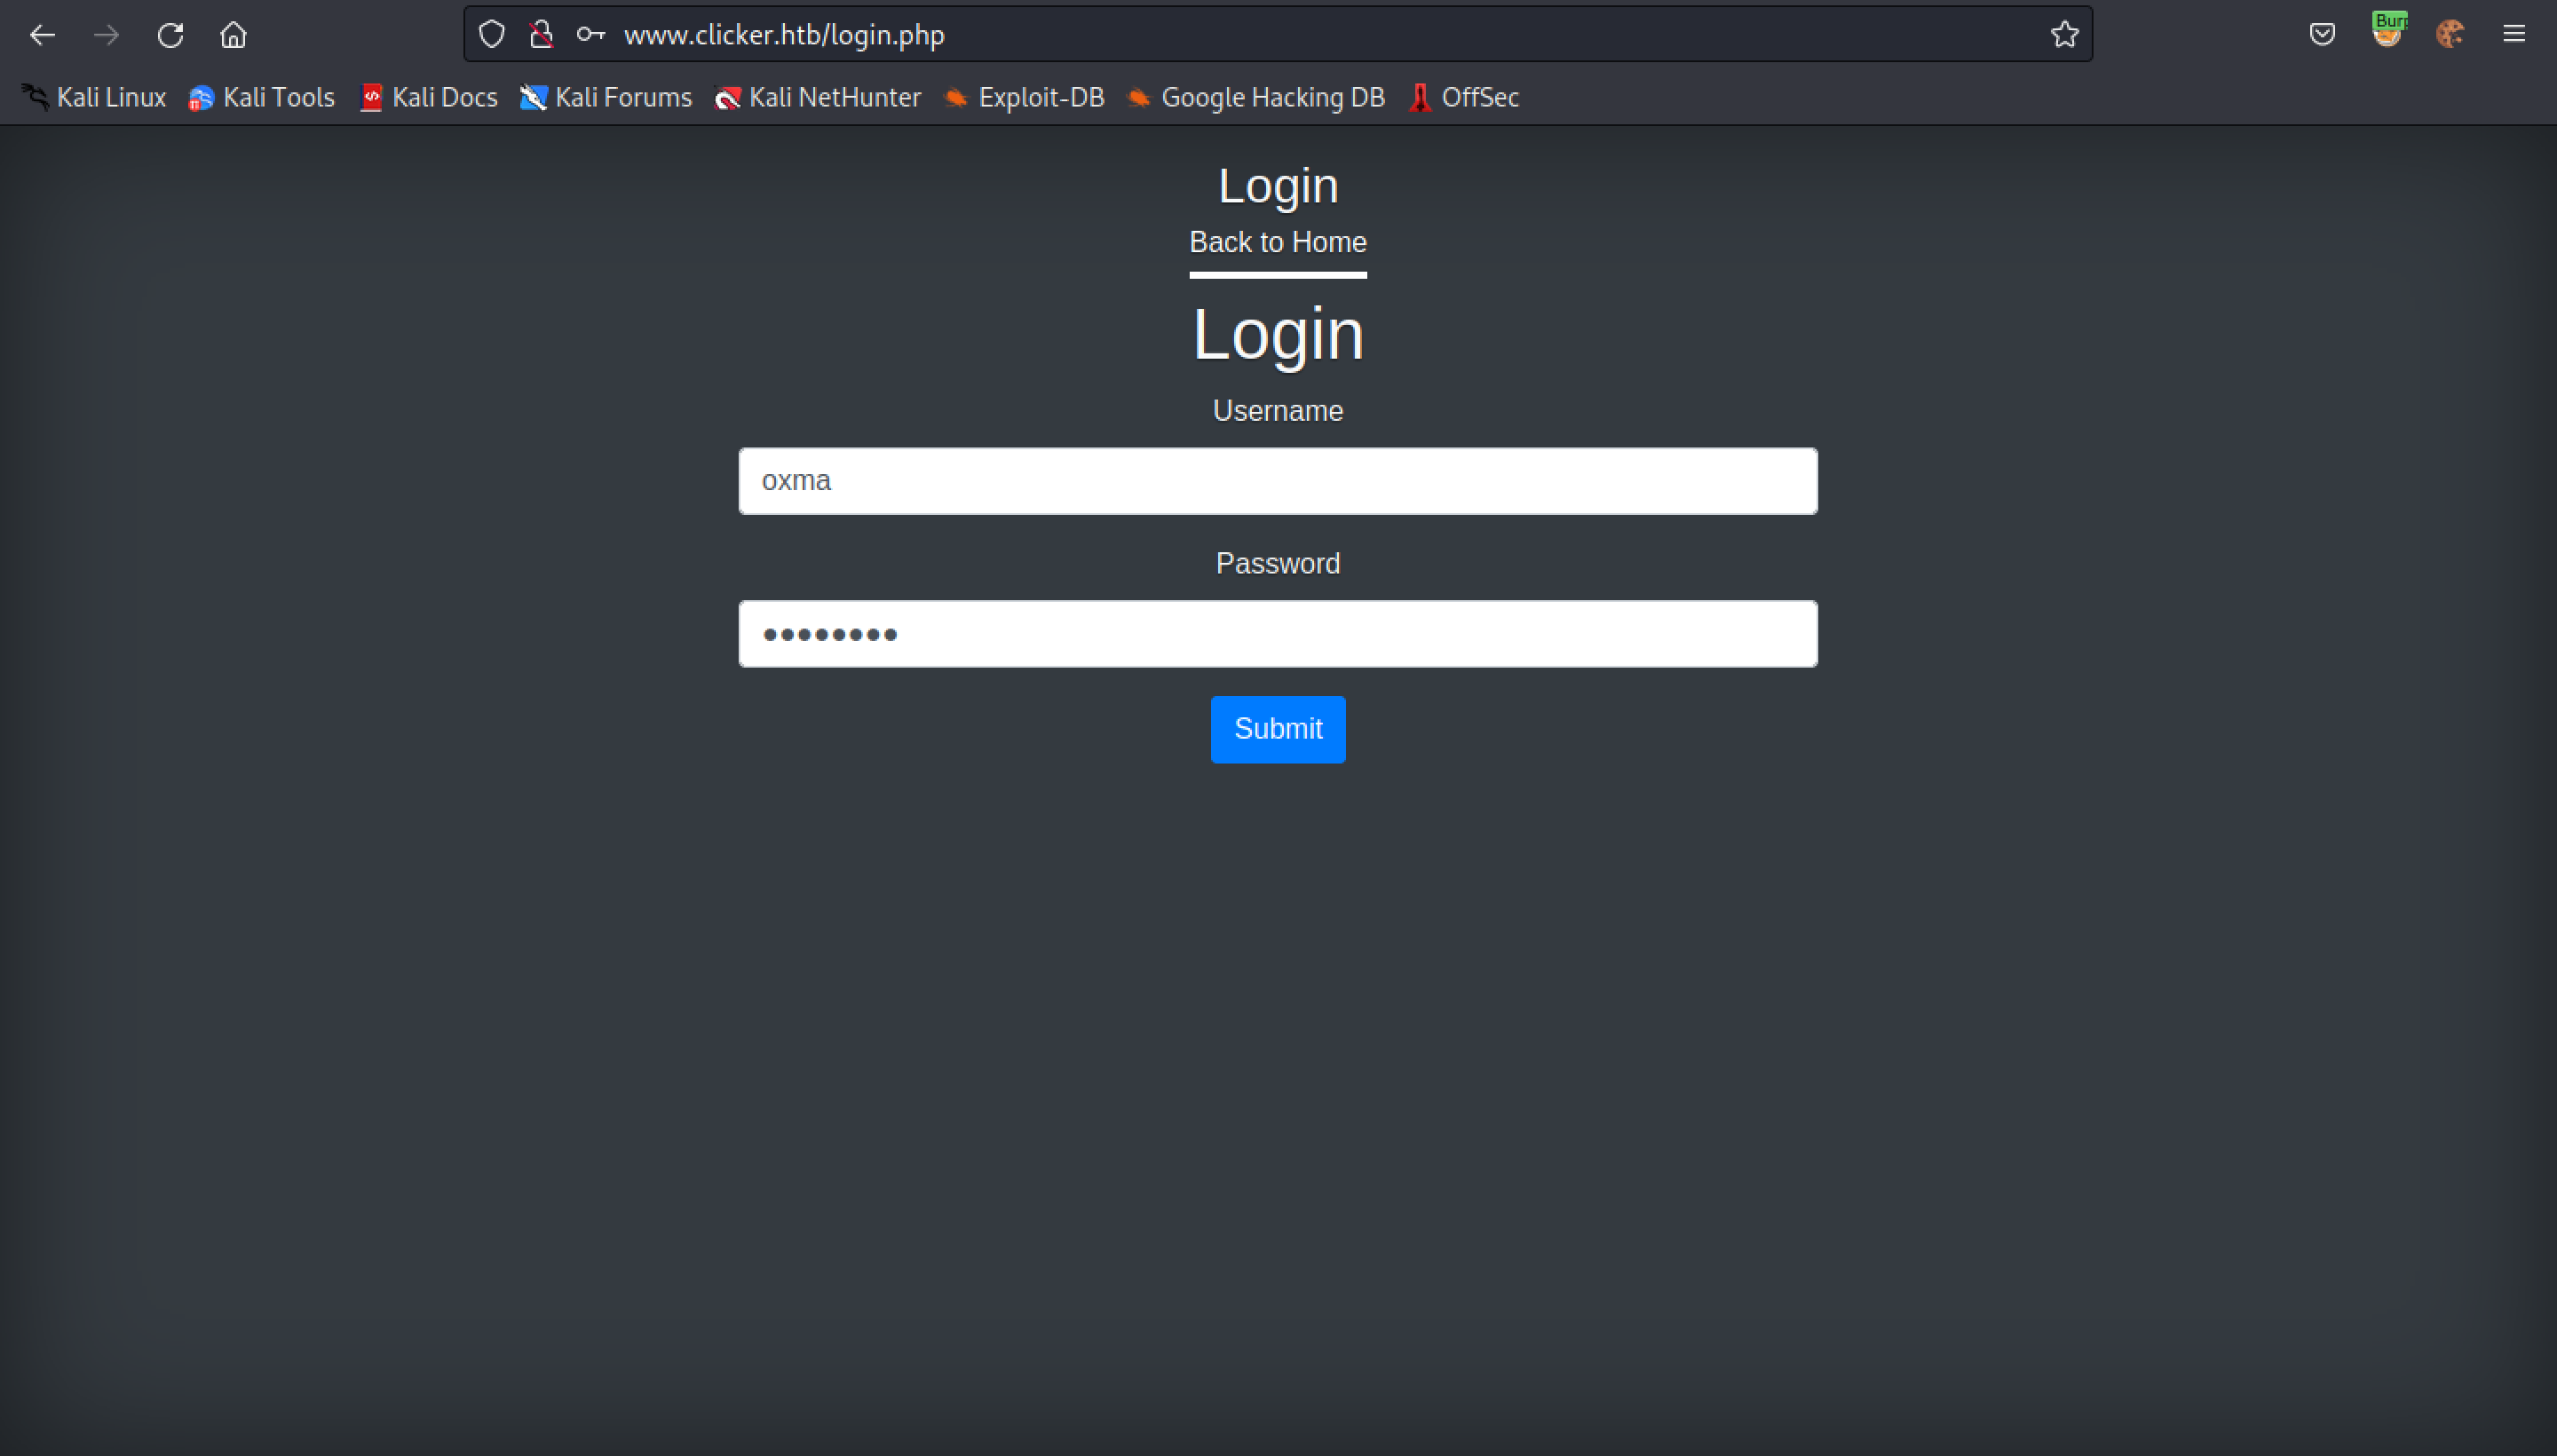 Logging into the web application.